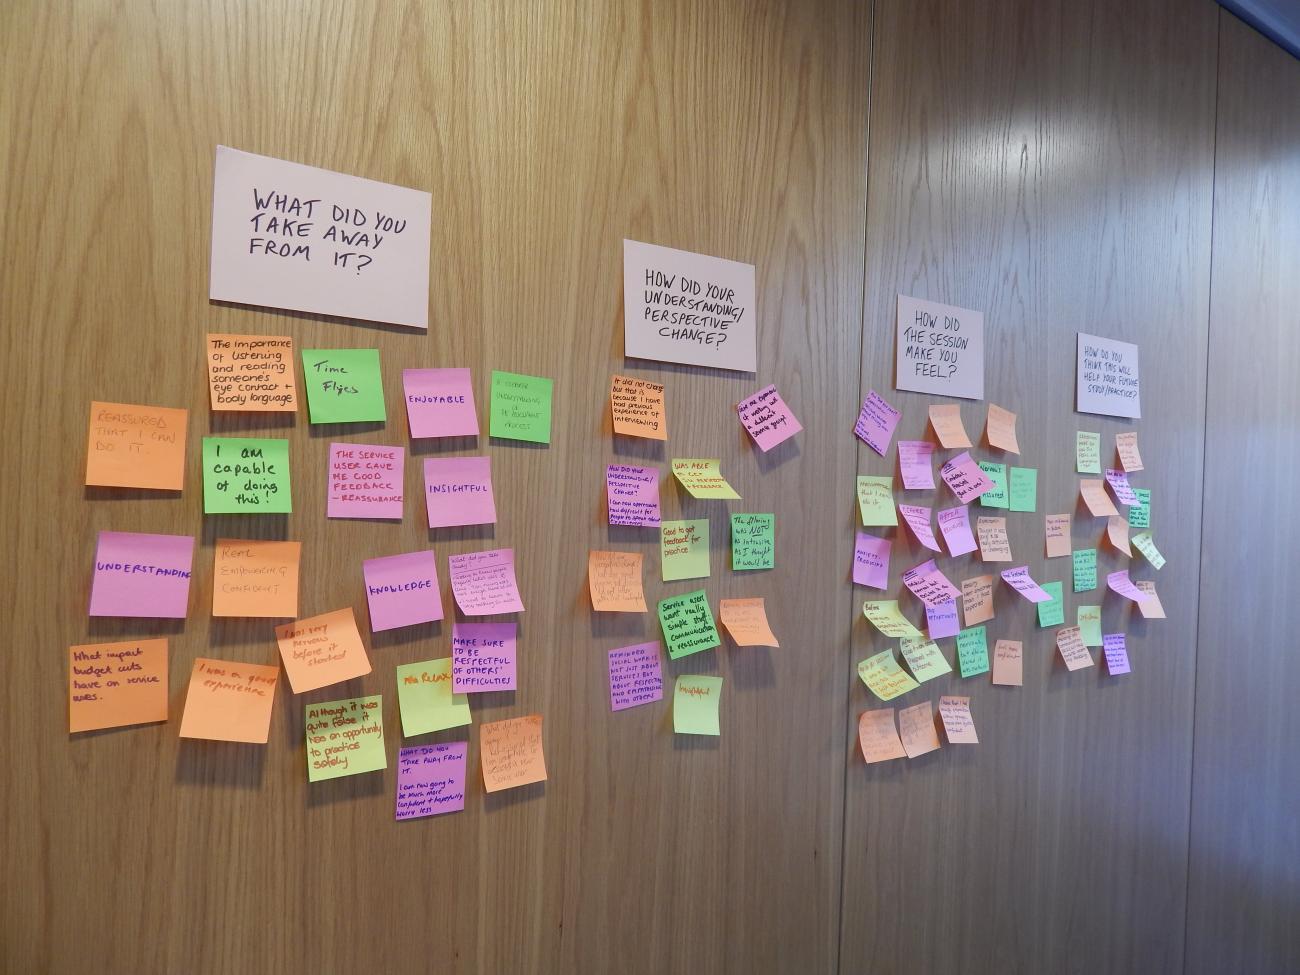 Post-it note responses from students before the discussion